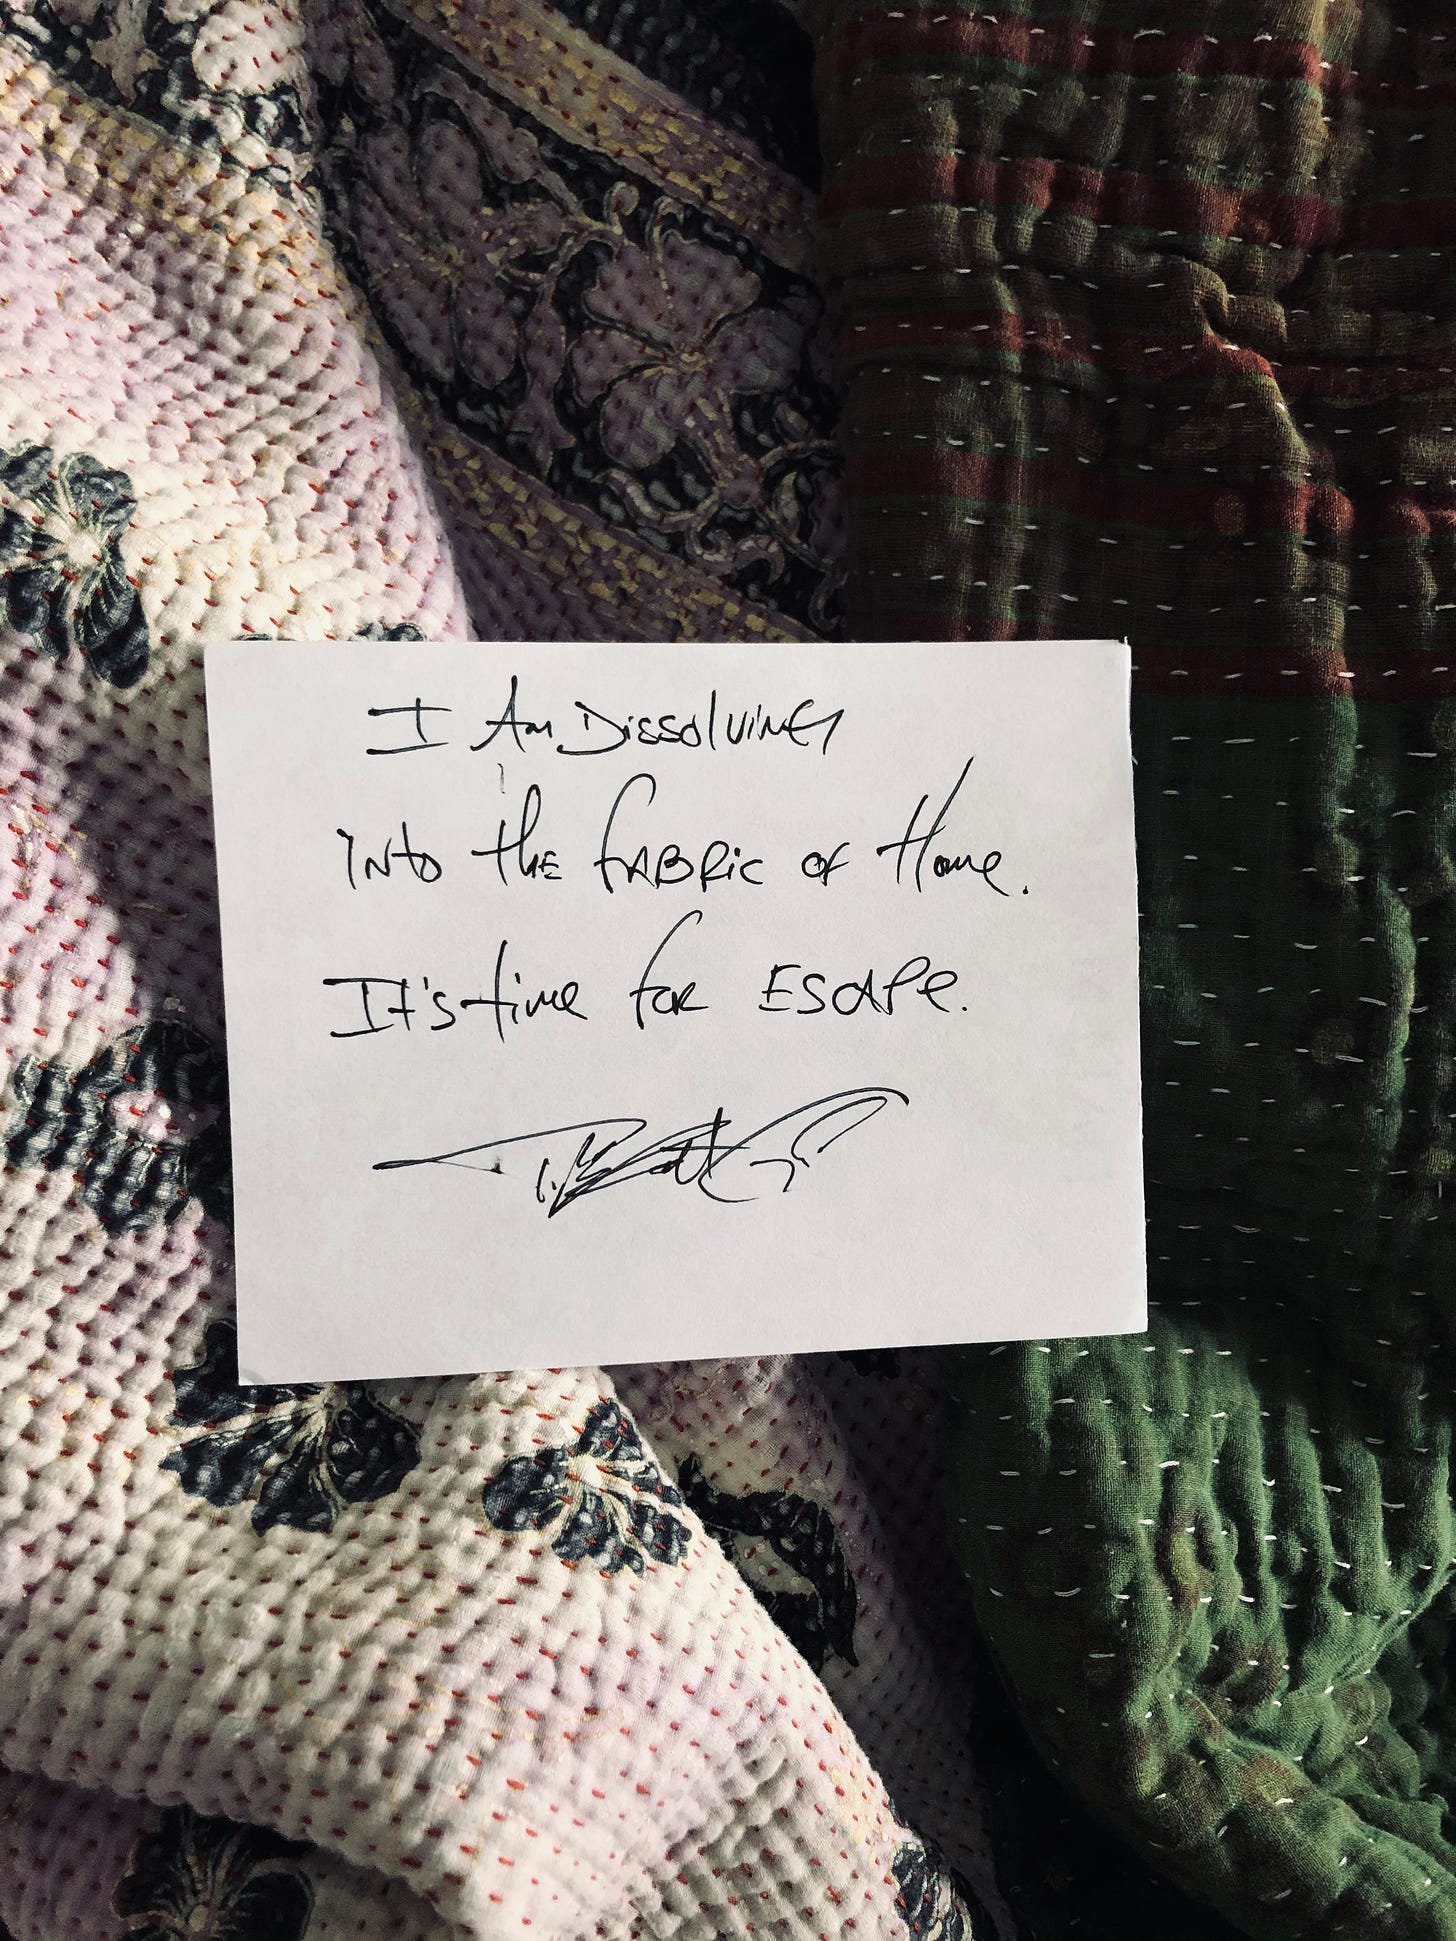 I am dissolving into the fabric of home. It's time for escape. Haiku on Life by Tyler Knott Gregson